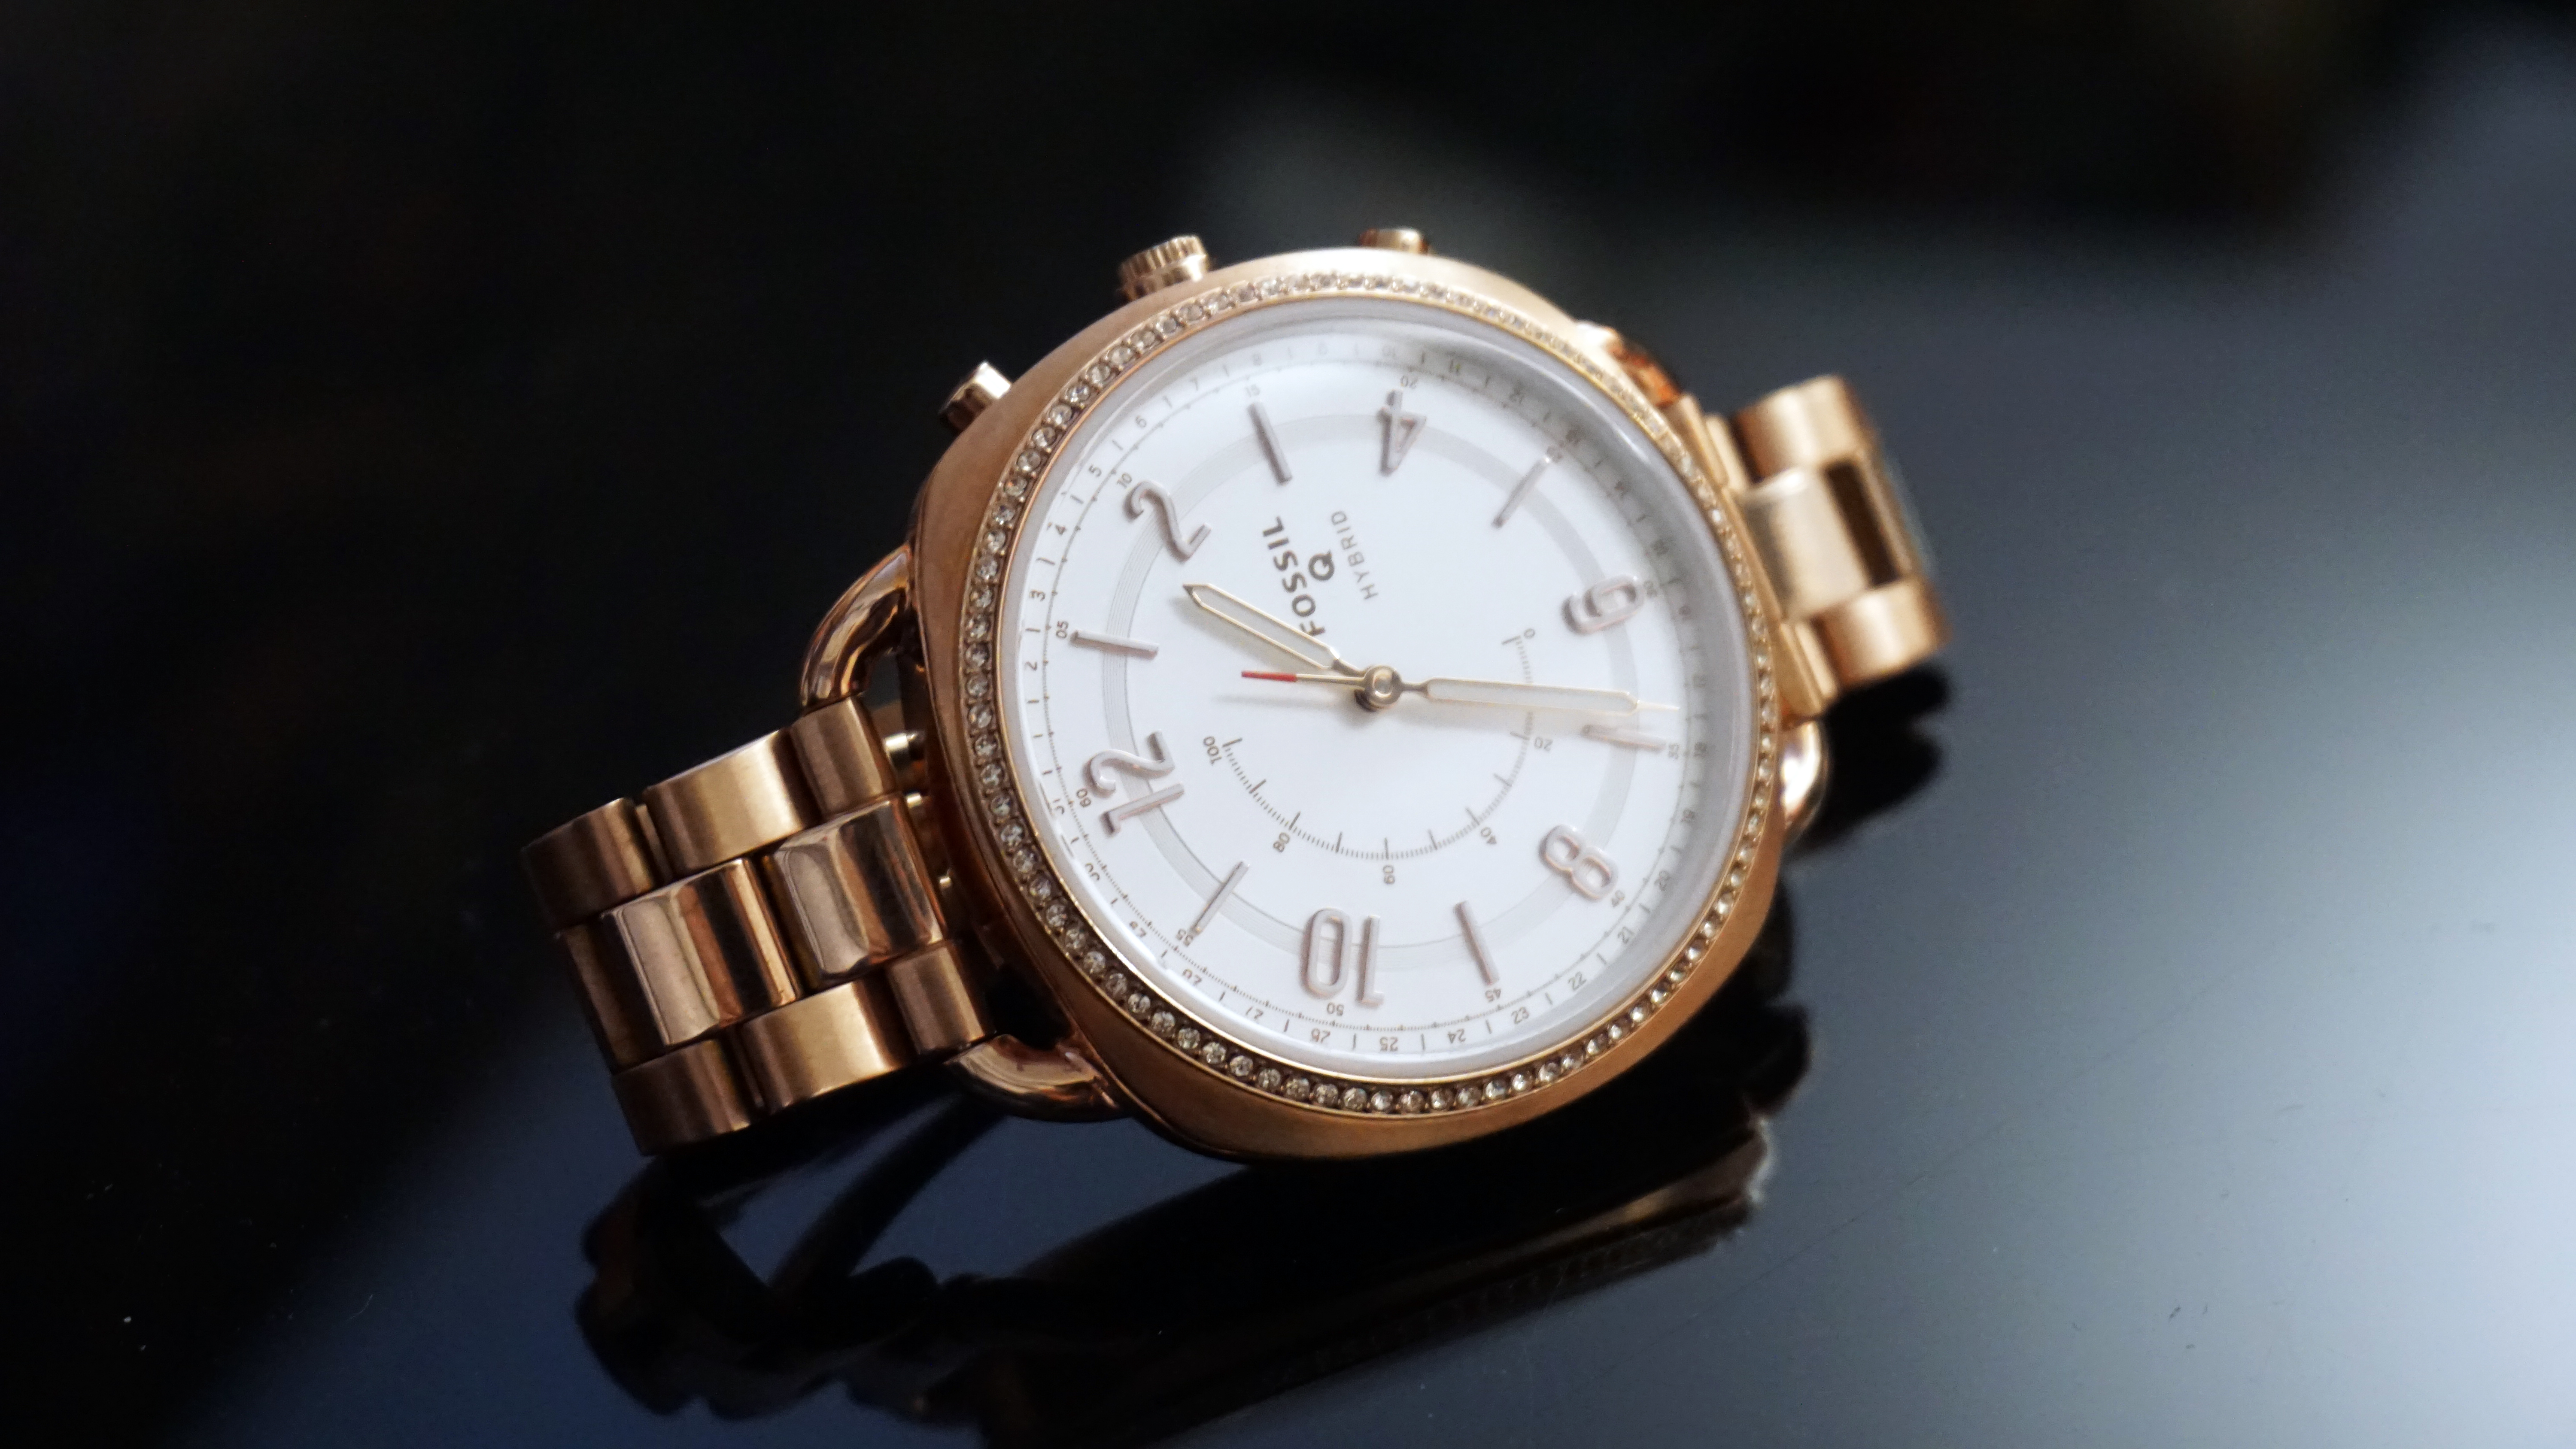 The Fossil Q Accomplice could be mistaken for a traditional, mechanical watch rather than a hybrid smartwatch. 